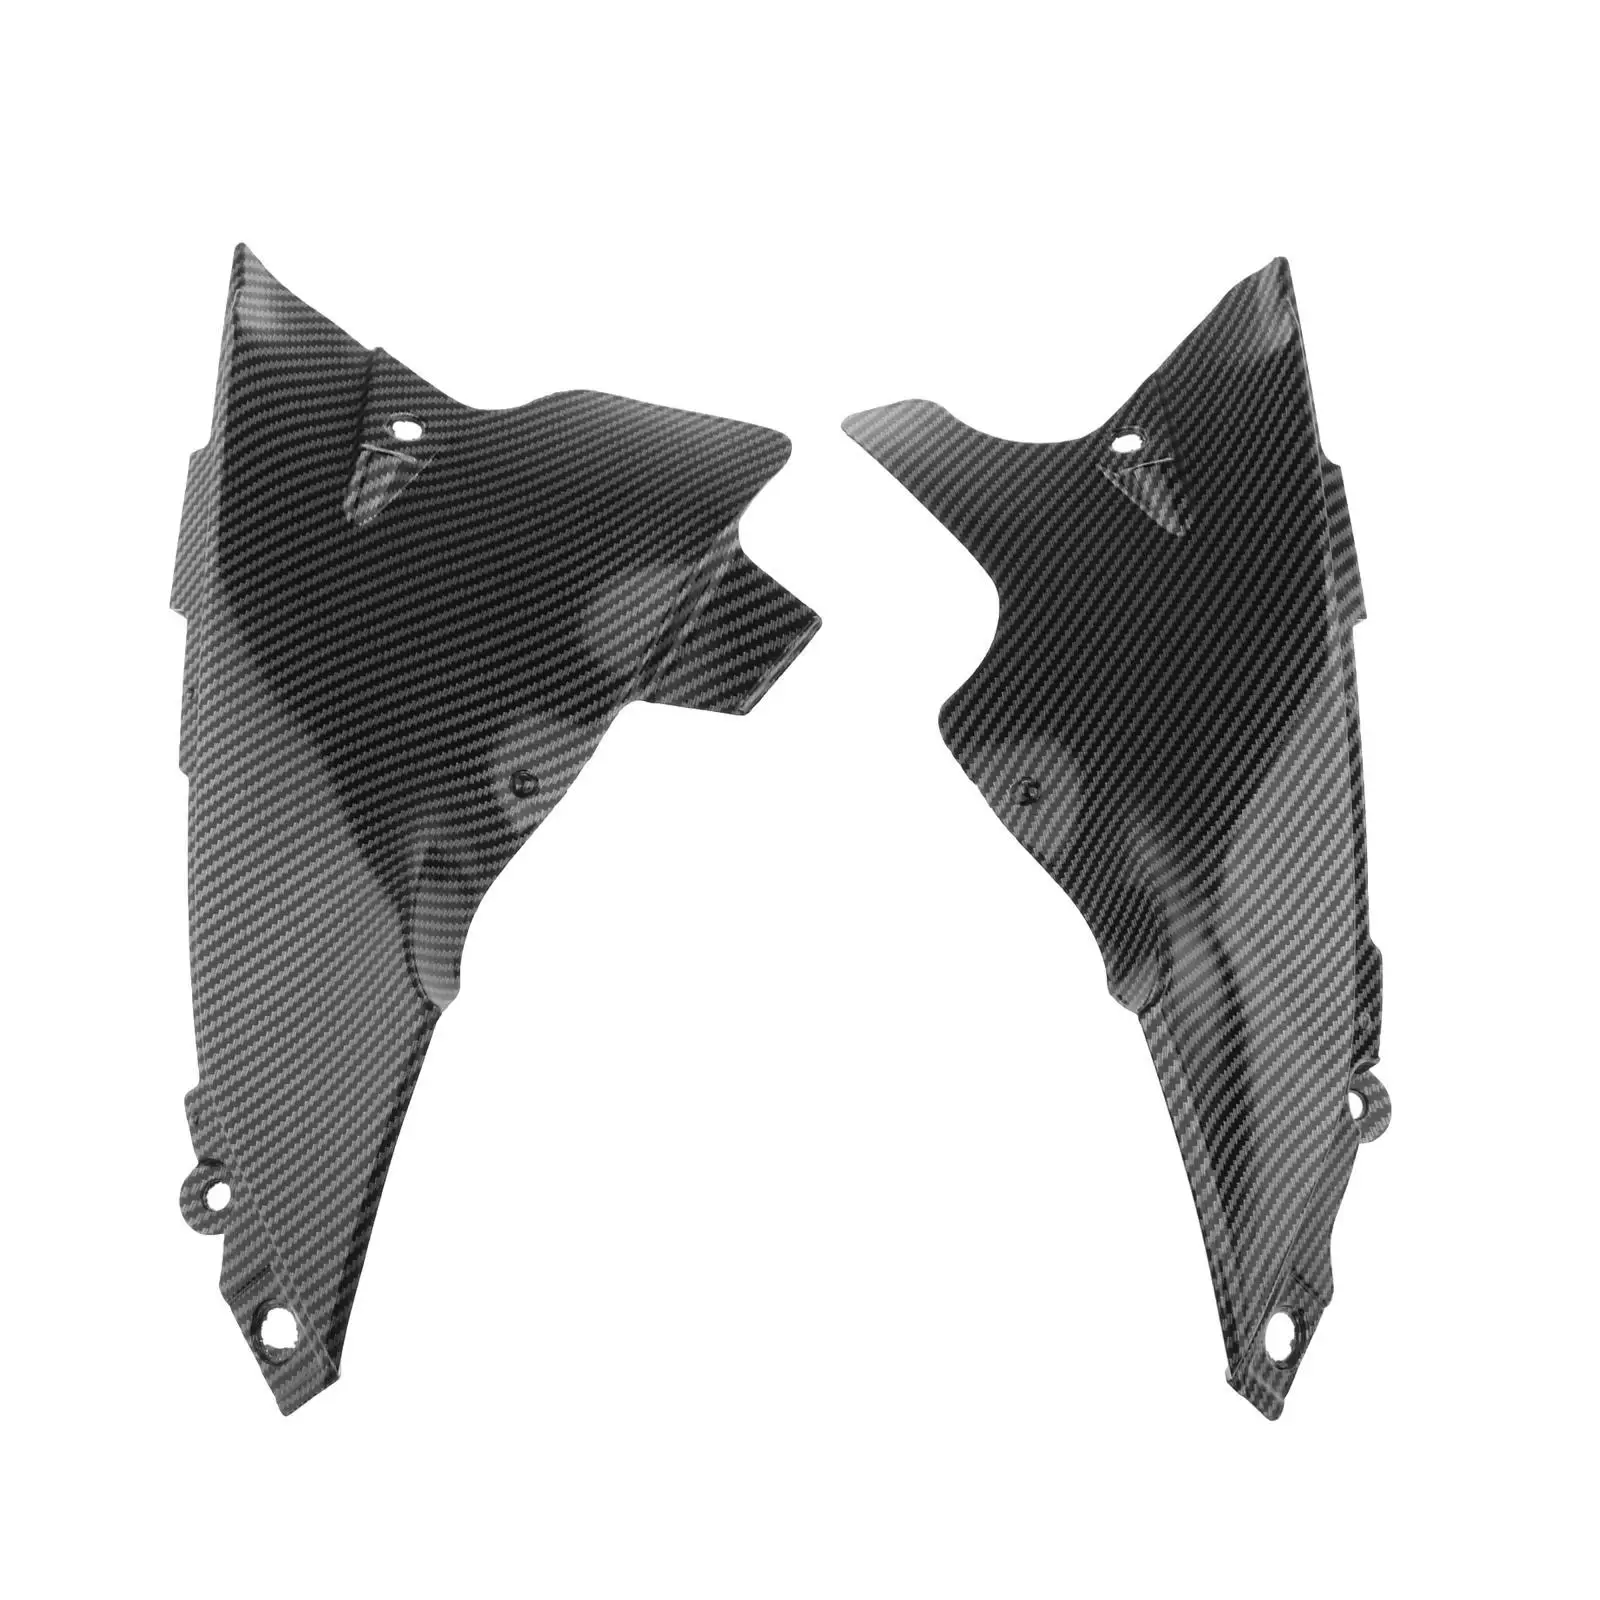  Pair  Front  Cover Fairing for  R1 2004-2006, Easy to Install